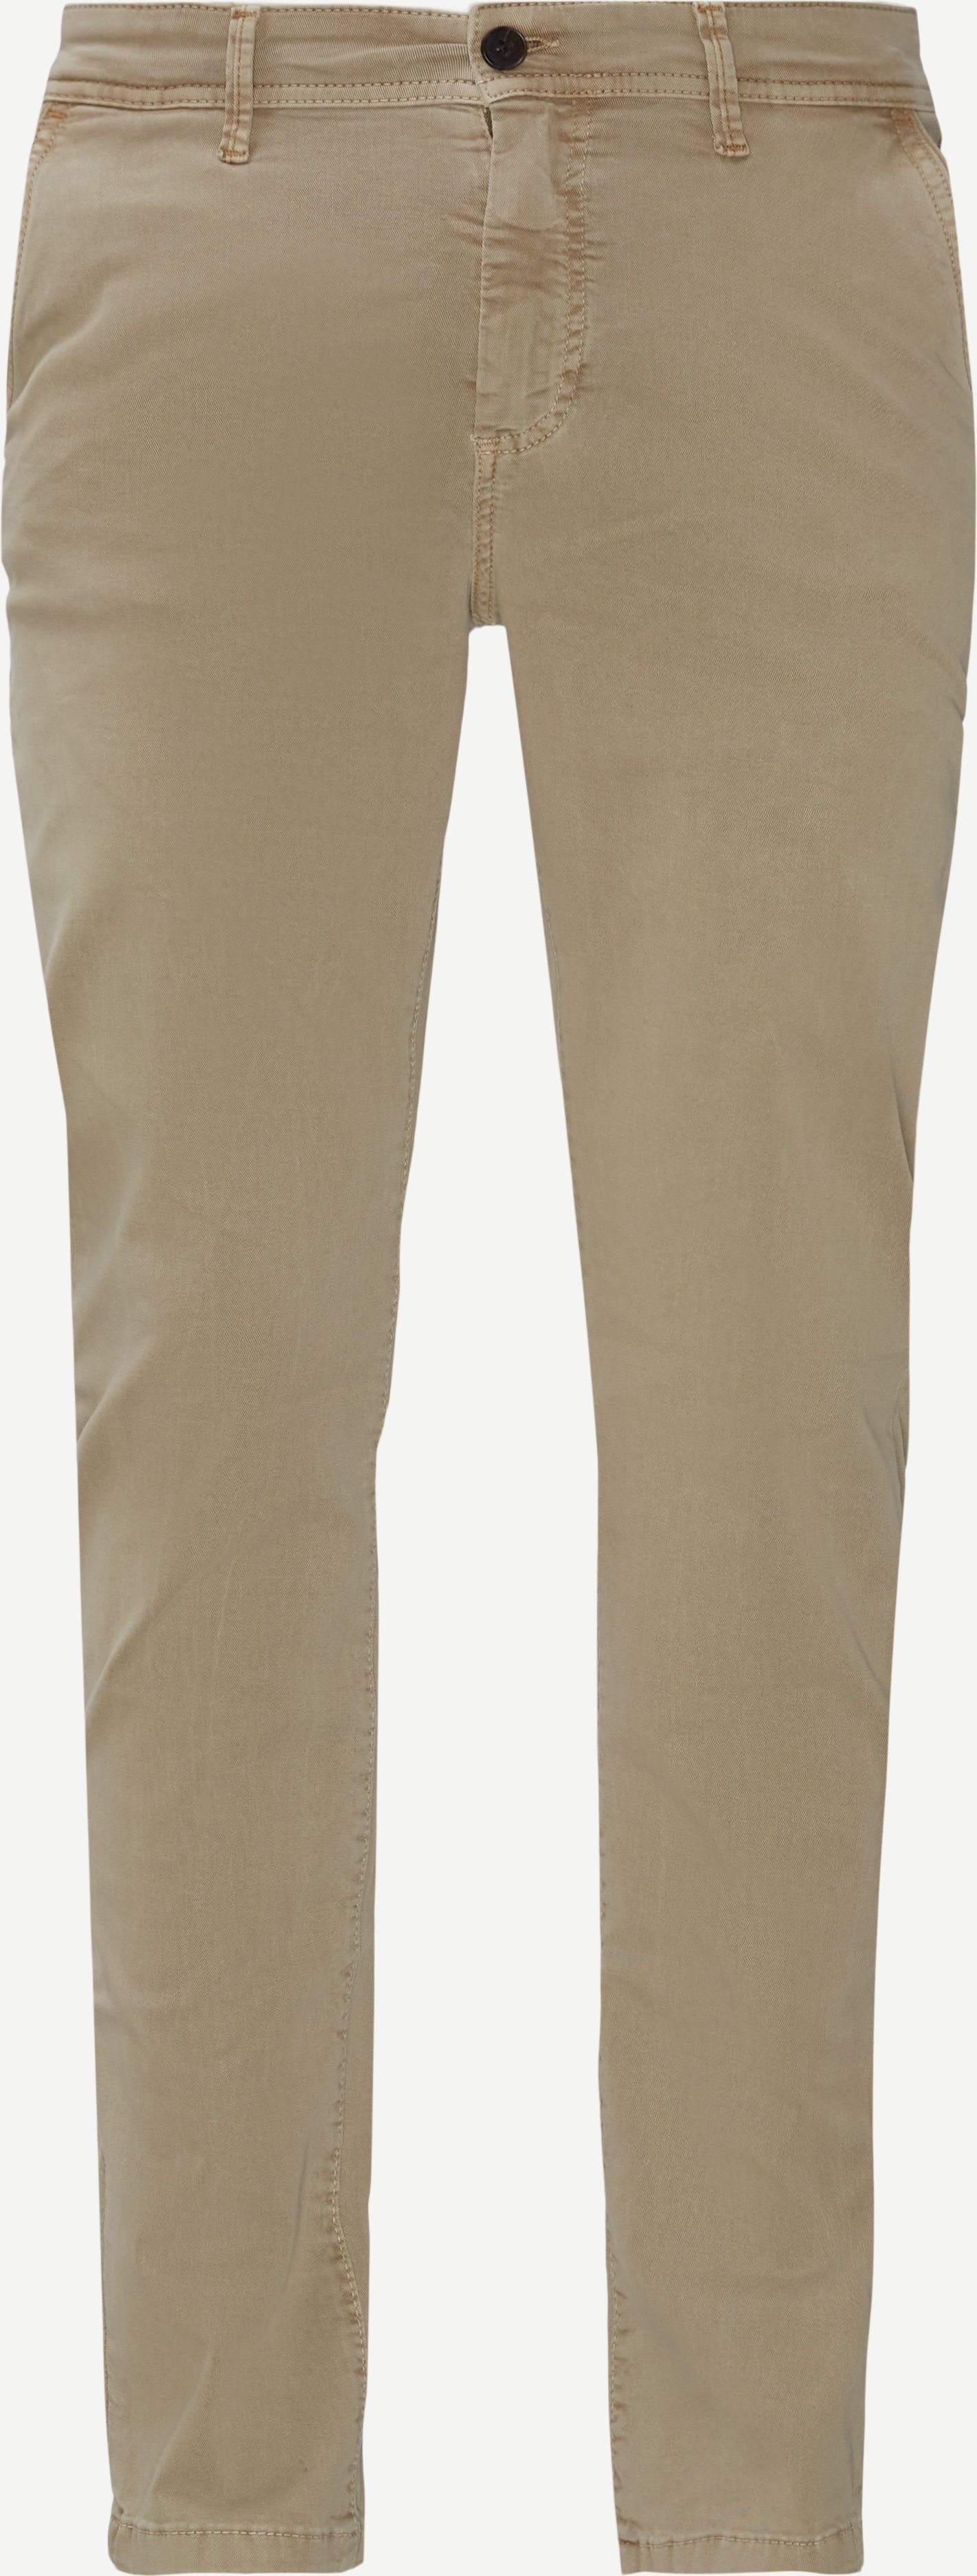 Victor Chinos - Bukser - Tapered fit - Sand